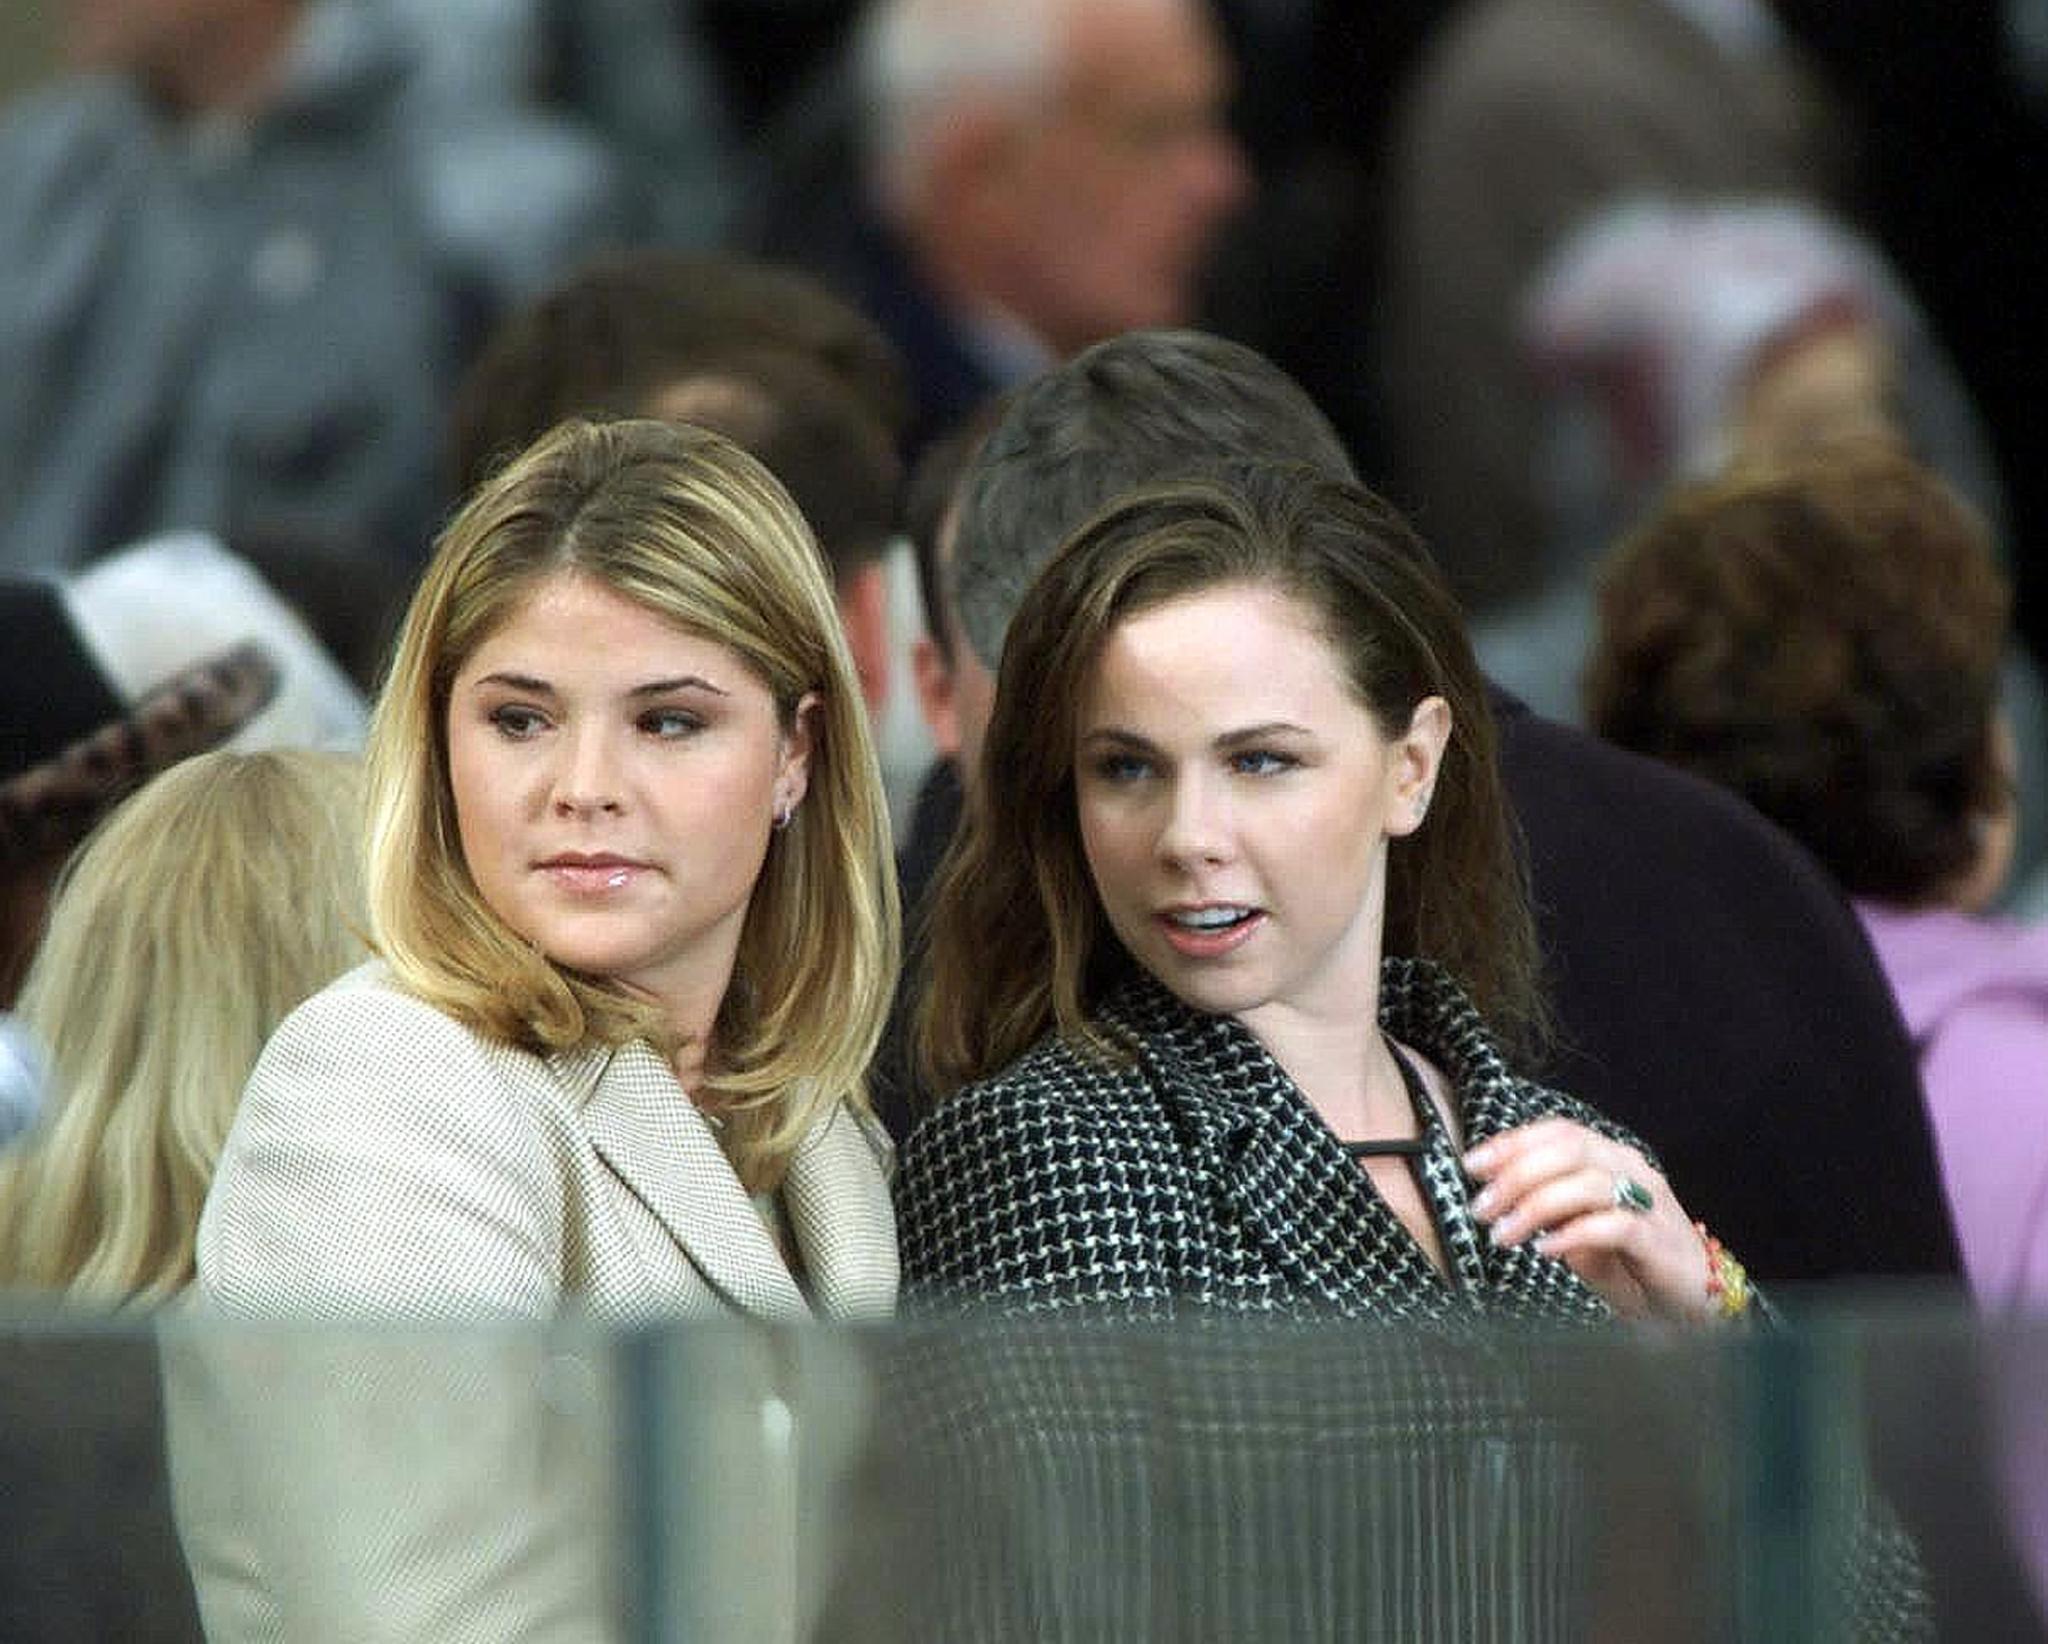 Jenna and Barbara Bush, stand on the podium as they await their father, George W. Bush's inauguration 20 January 2001 at the US Capitol in Washington, DC  | Source: Getty Images